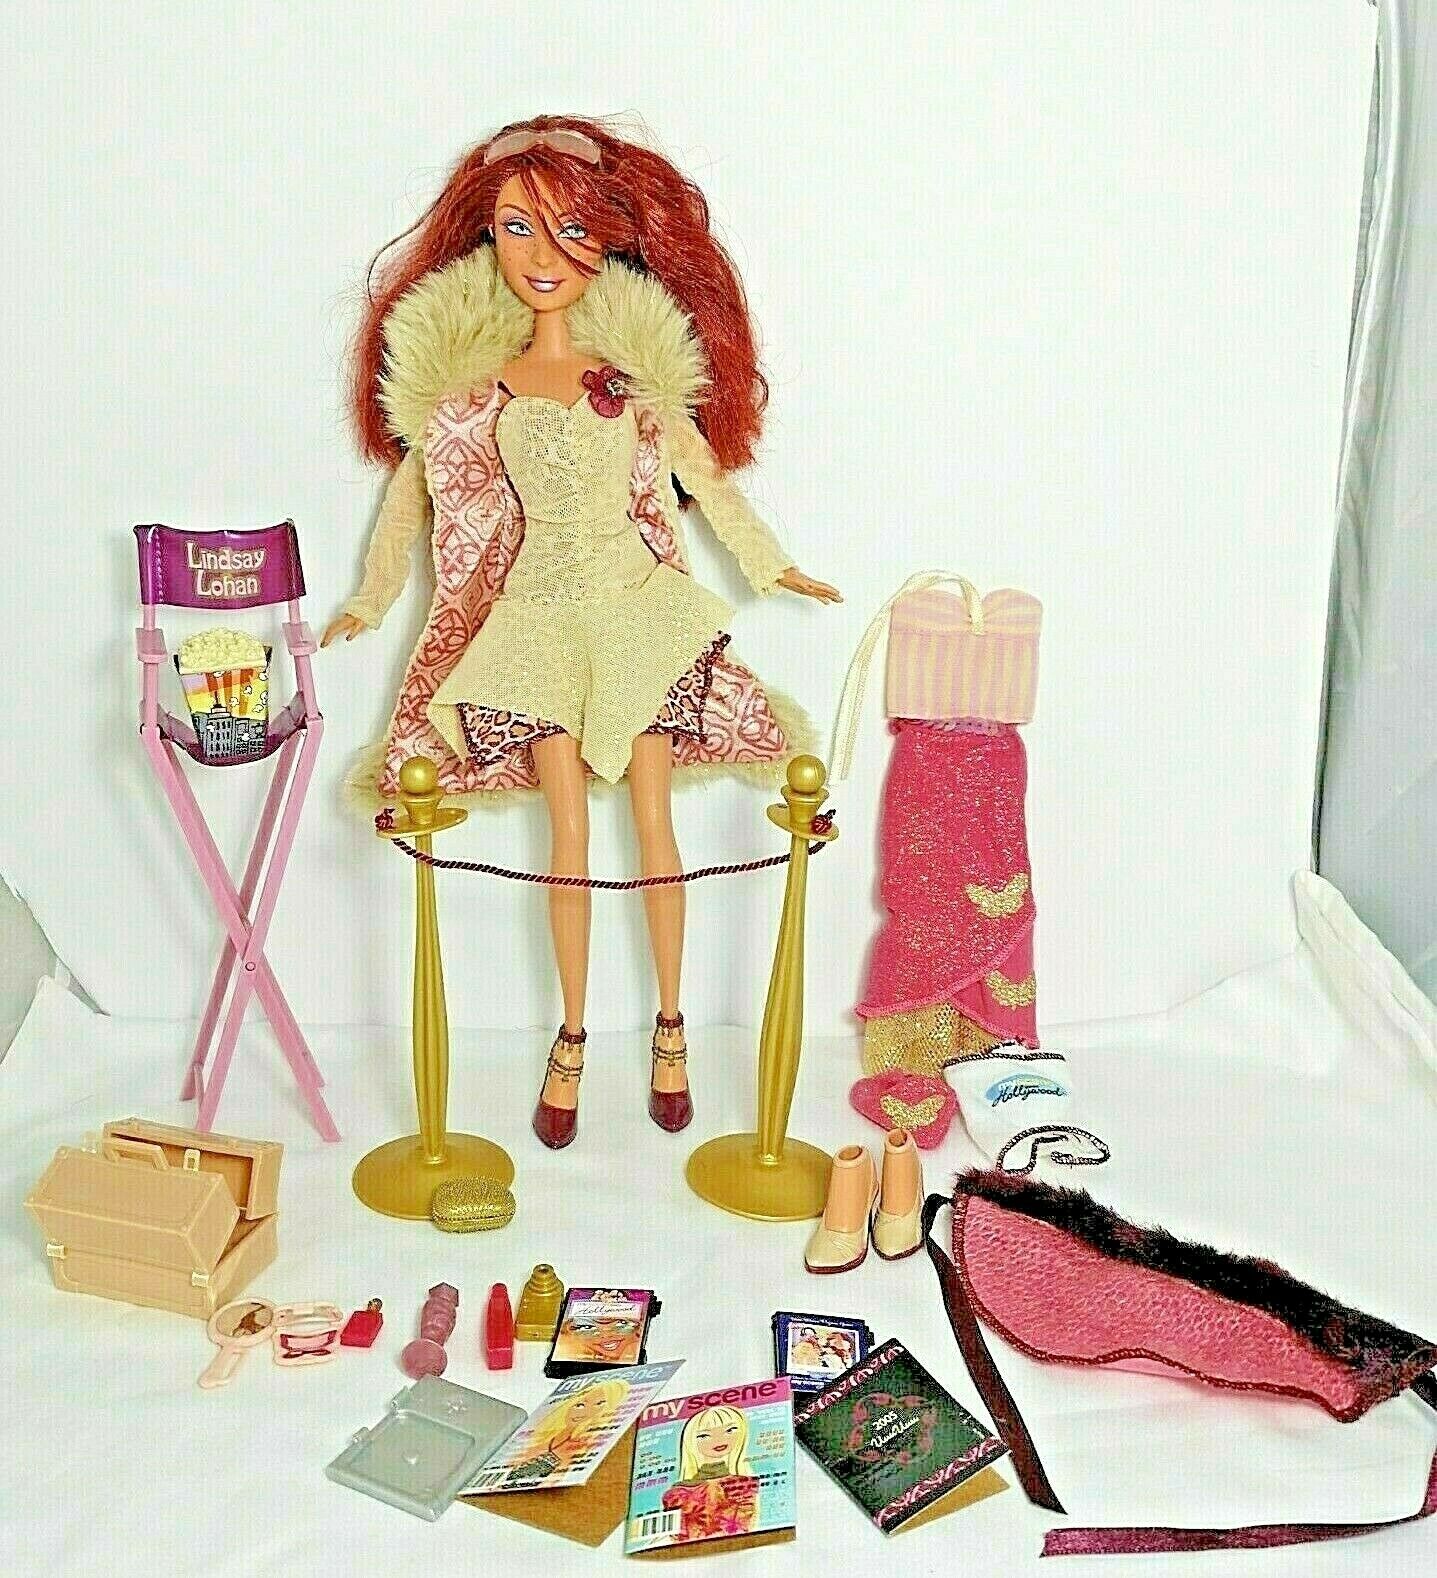 Mattel Barbie My Scene Lindsay Lohan Doll Goes To Hollywood  Near Complete